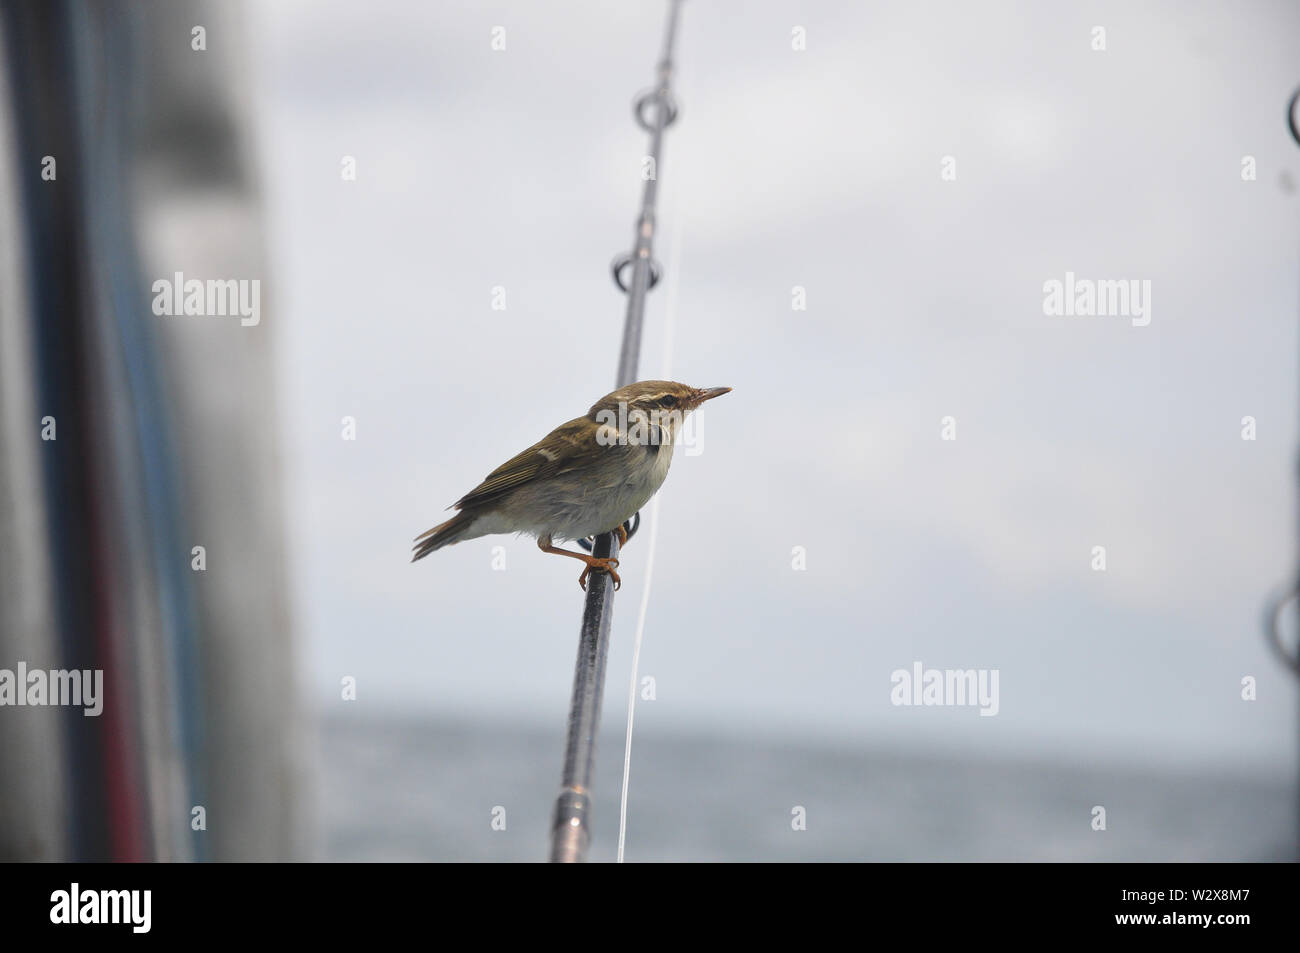 The Brown-flanked bush warbler (Horornis fortipes) resting on a fishing rod on a boat -  Image Stock Photo